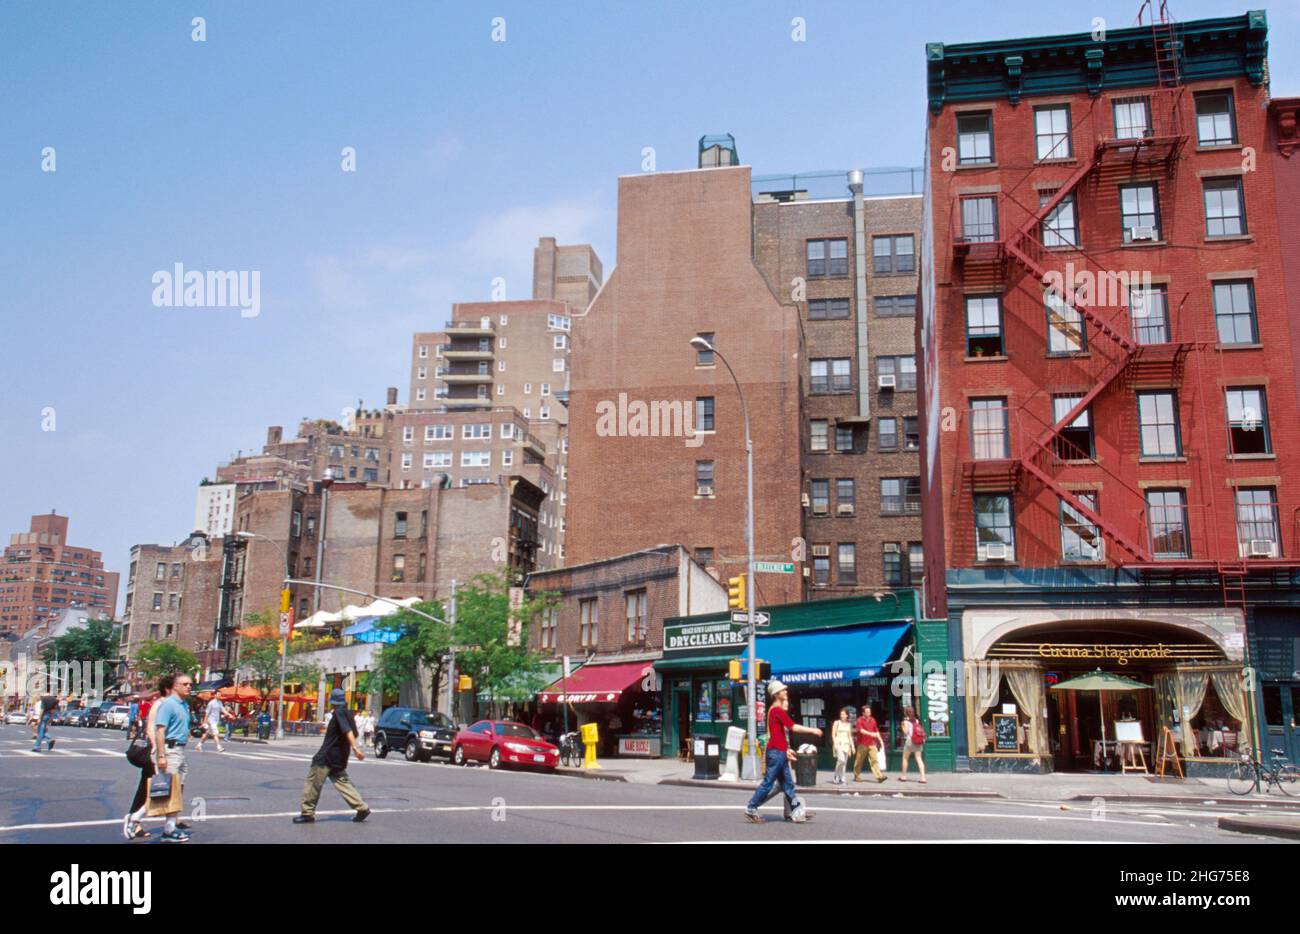 NY NYC,New York City,Manhattan West Side,Greenwich Village Bleeker Street South 7th Avenue intersection,building buildings city skyline,pedestrian ped Stock Photo